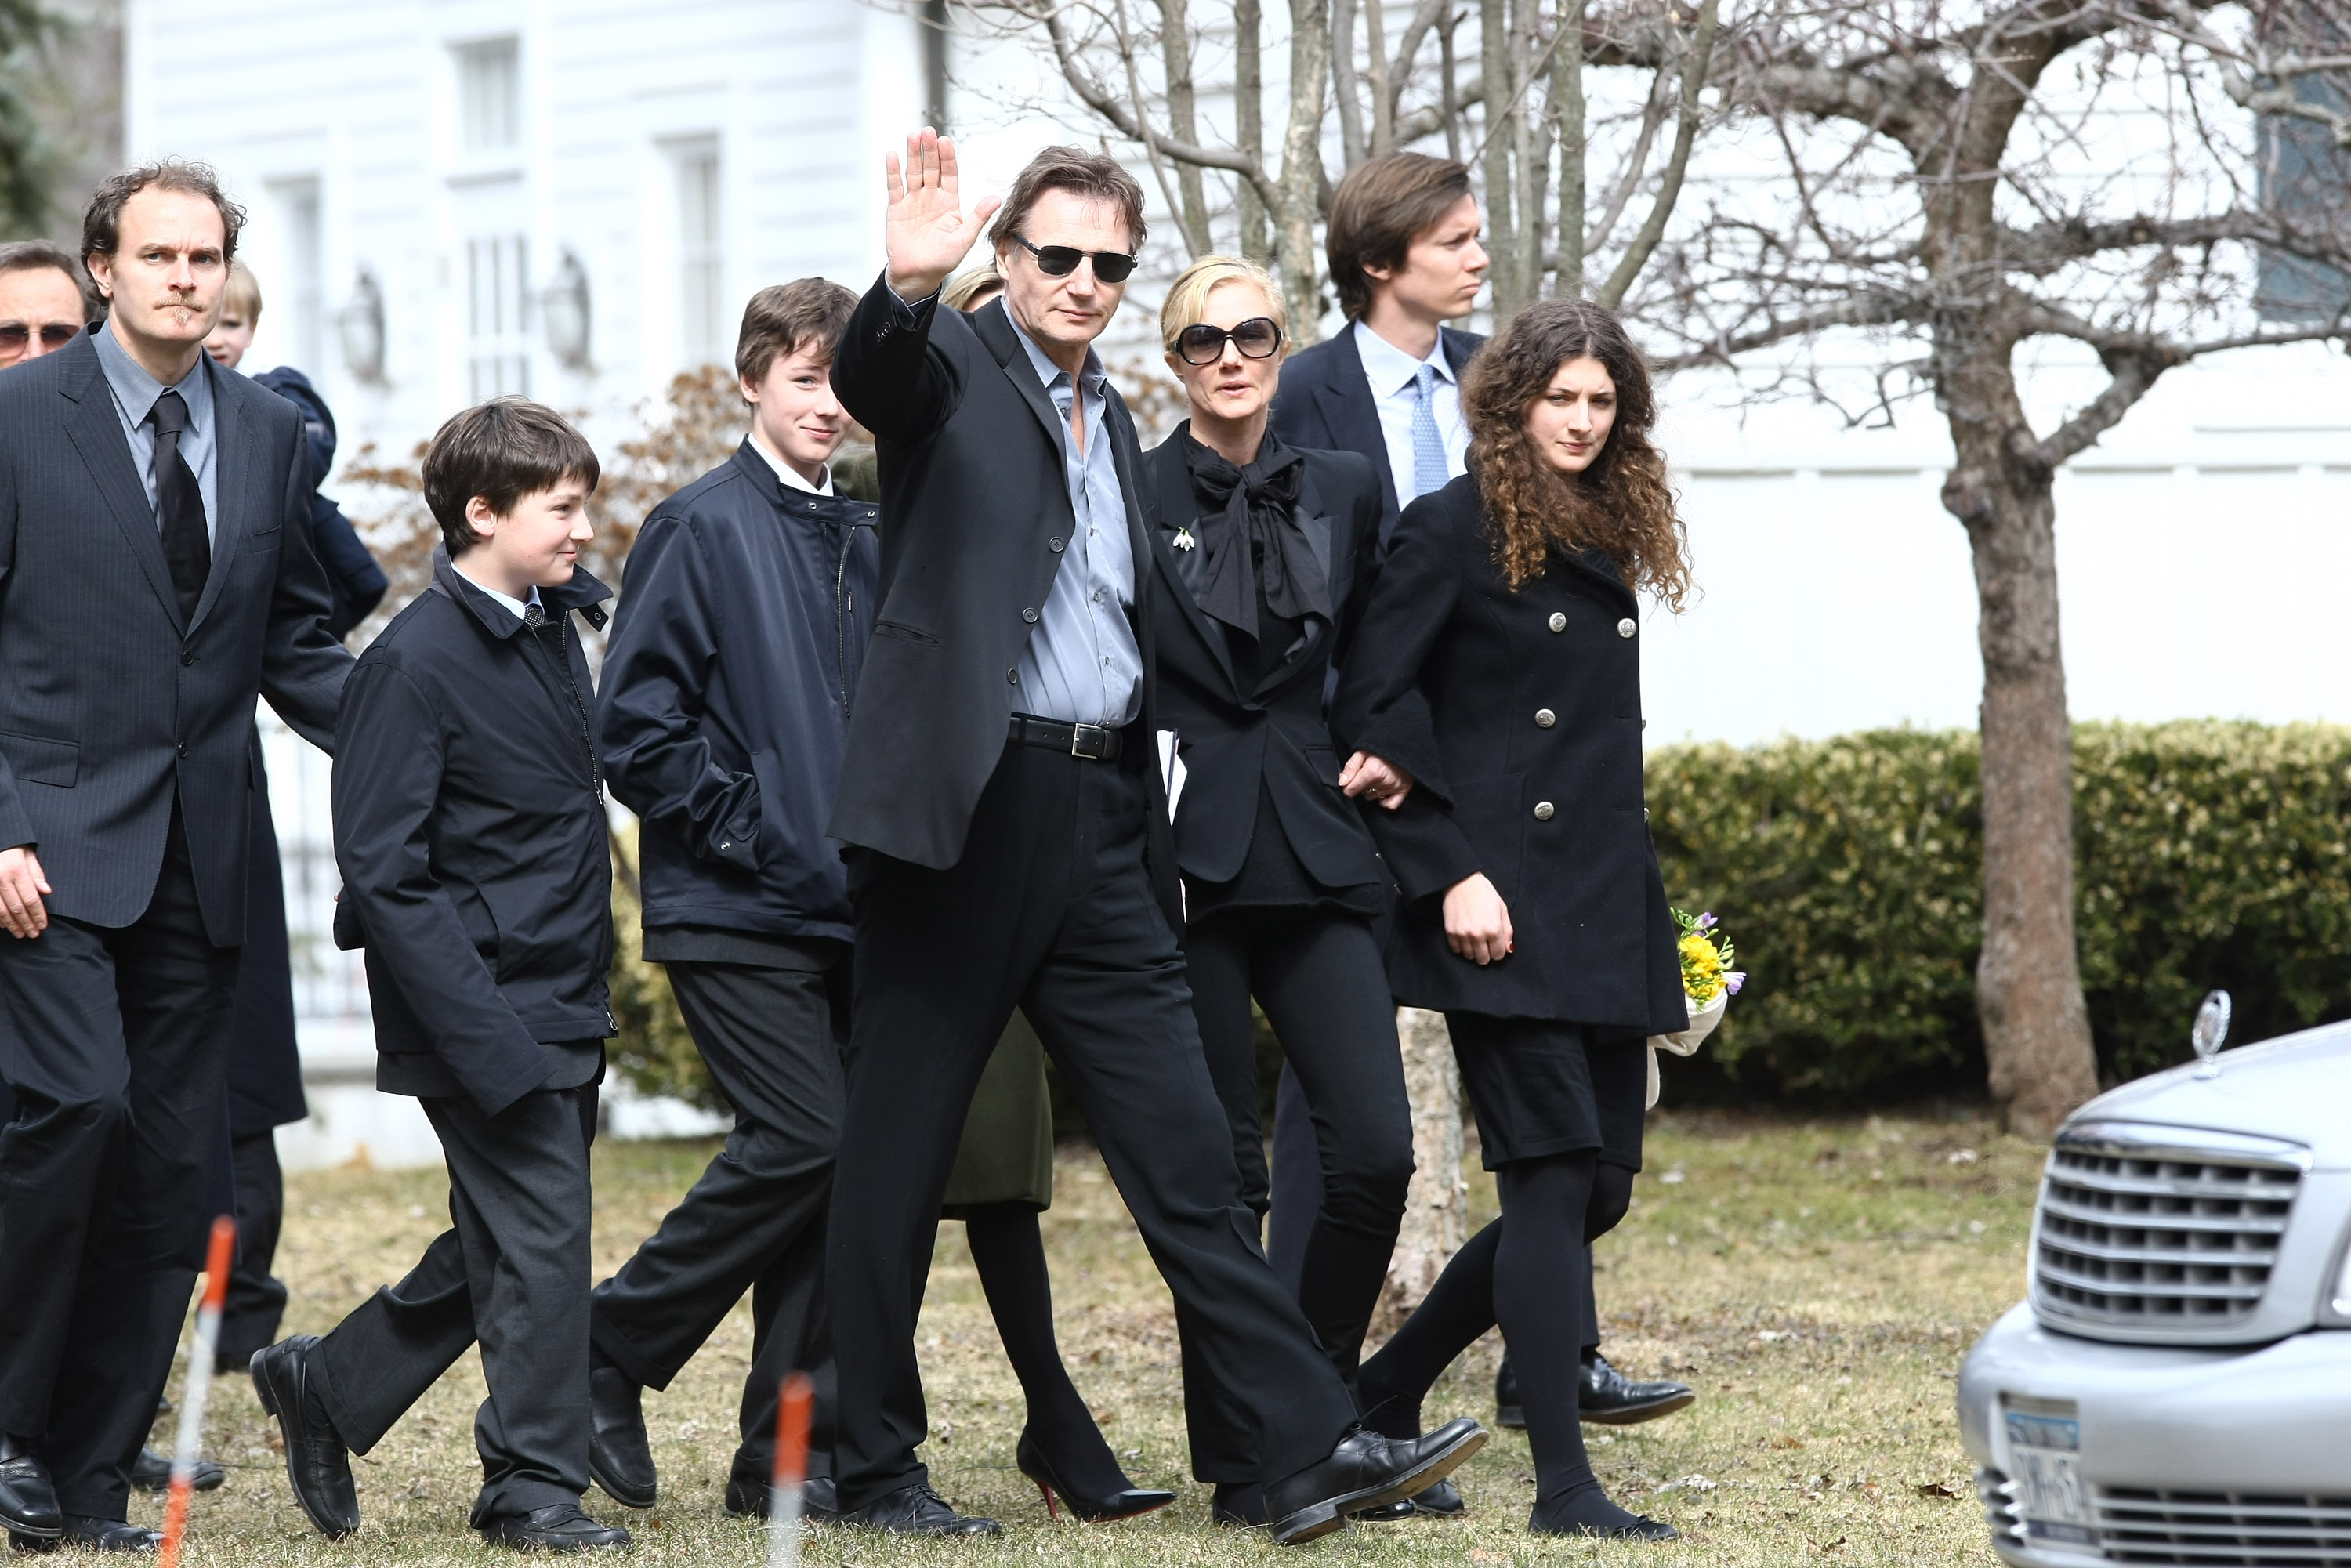 Liam Neeson arriving with family for Natasha Richardson's funeral service in Lithgow, New York on March 22, 2009 | Source: Getty Images